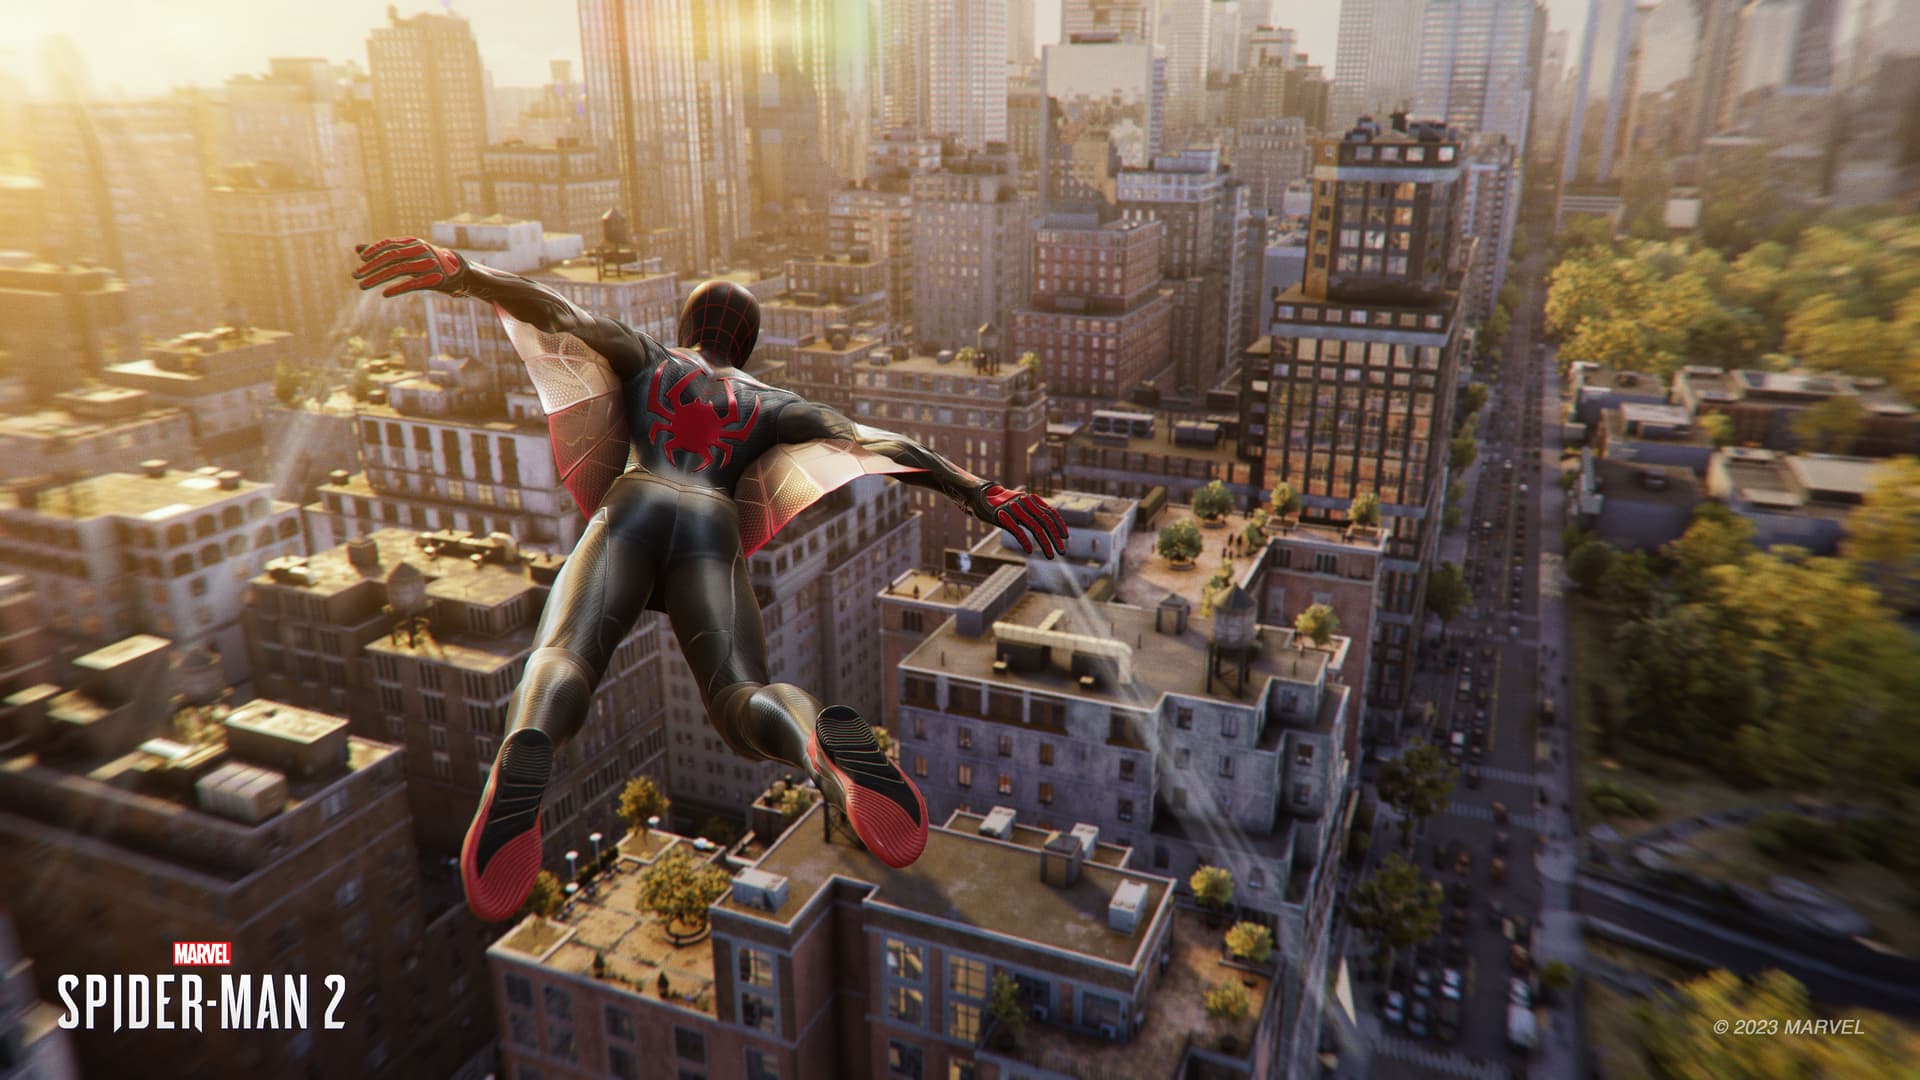 Miles Morales uses his Web Wings to glide over Marvel's New York in 'Marvel's Spider-Man 2'